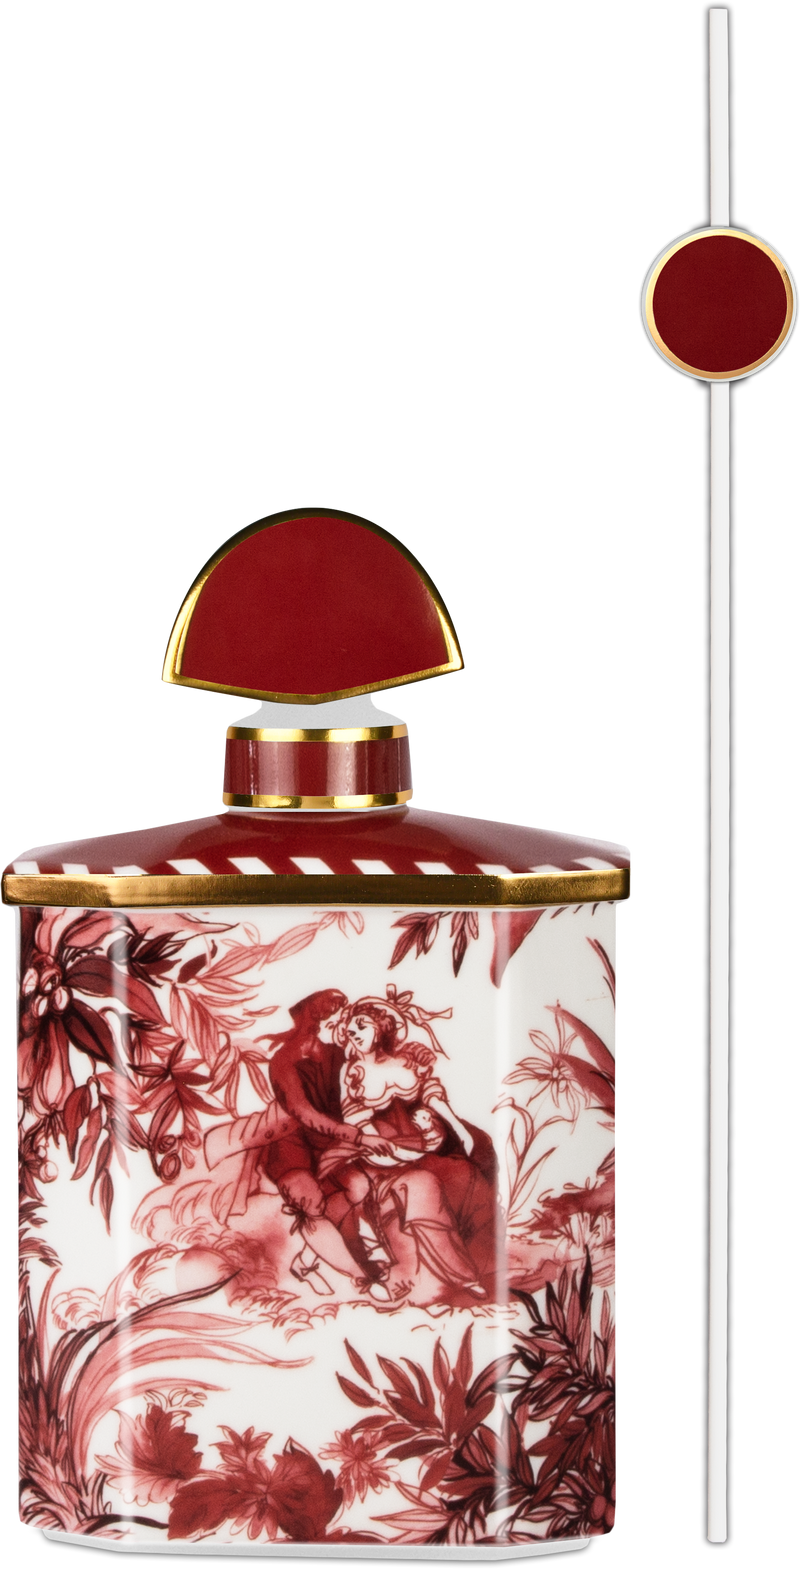 FRAGRANCE DIFFUSER MINI - Le Rouge collection